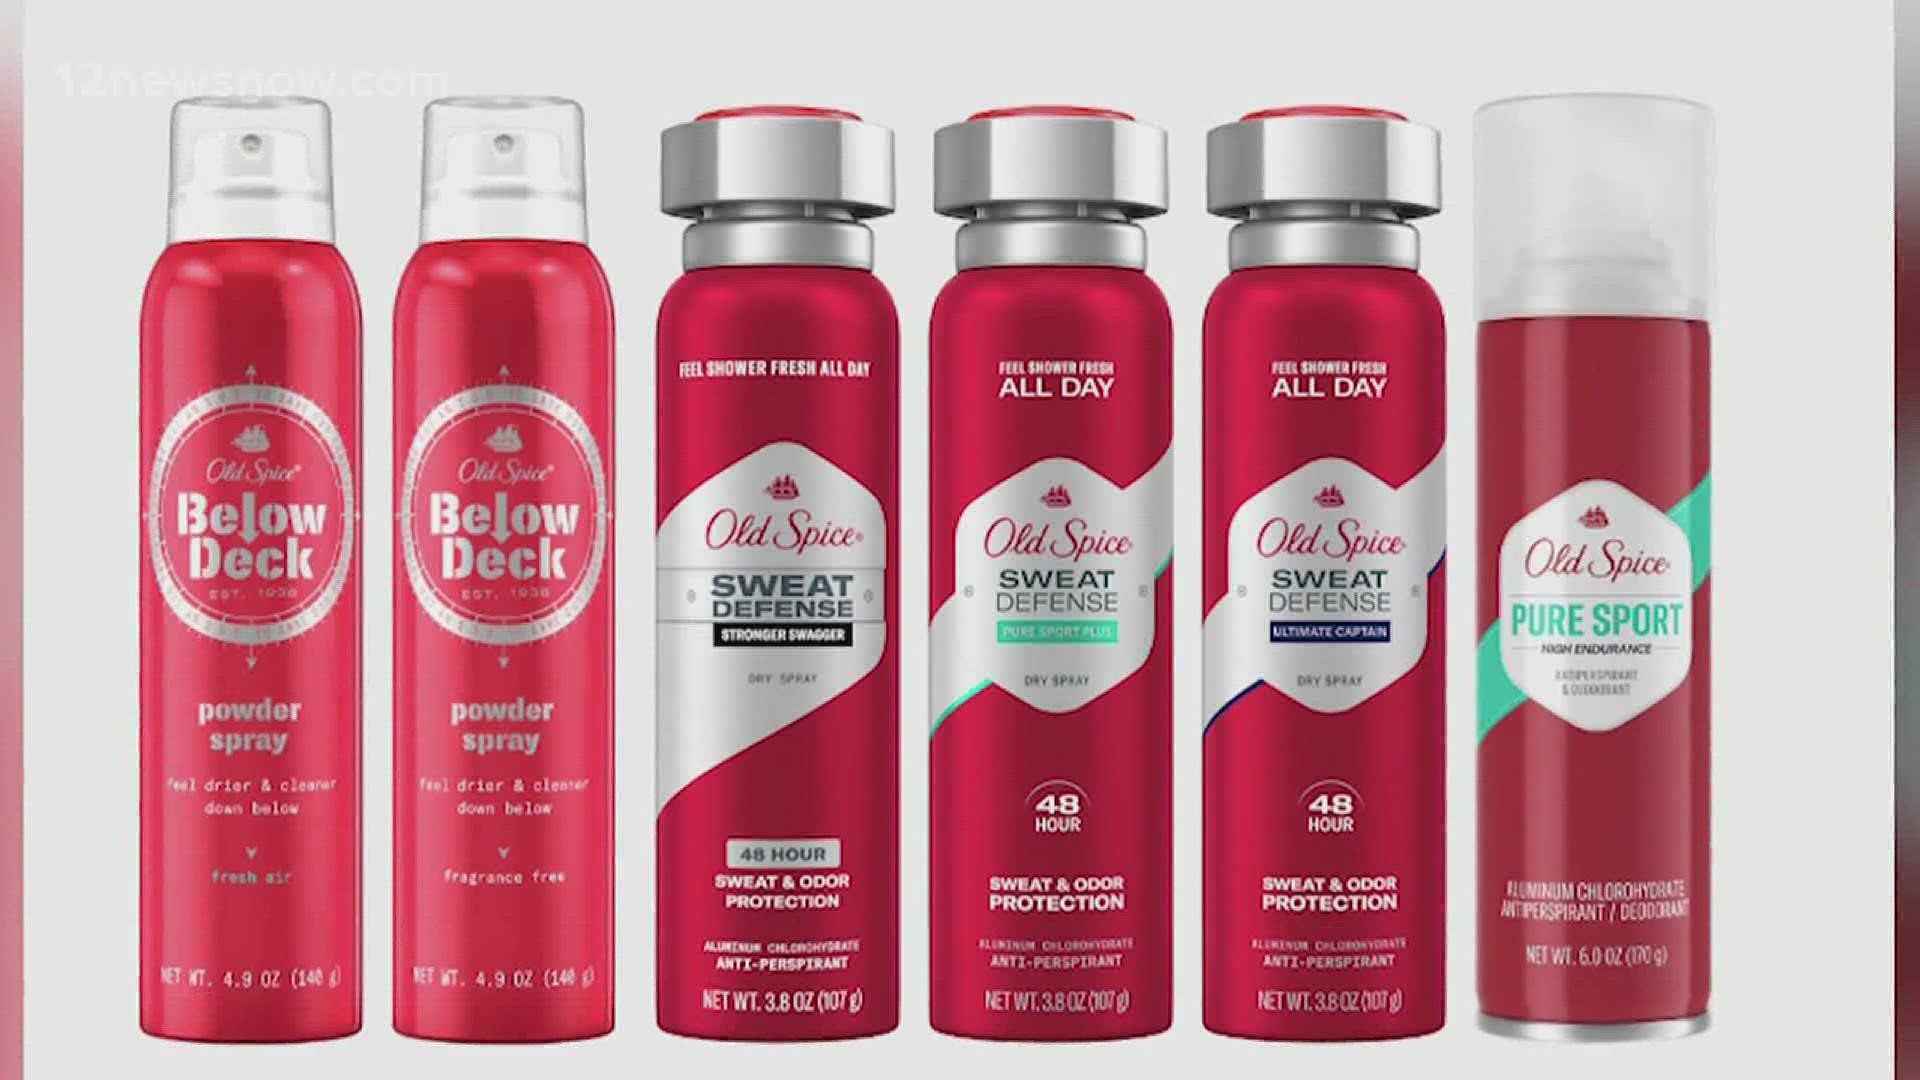 The deodorant sprays were sold in stores and online.